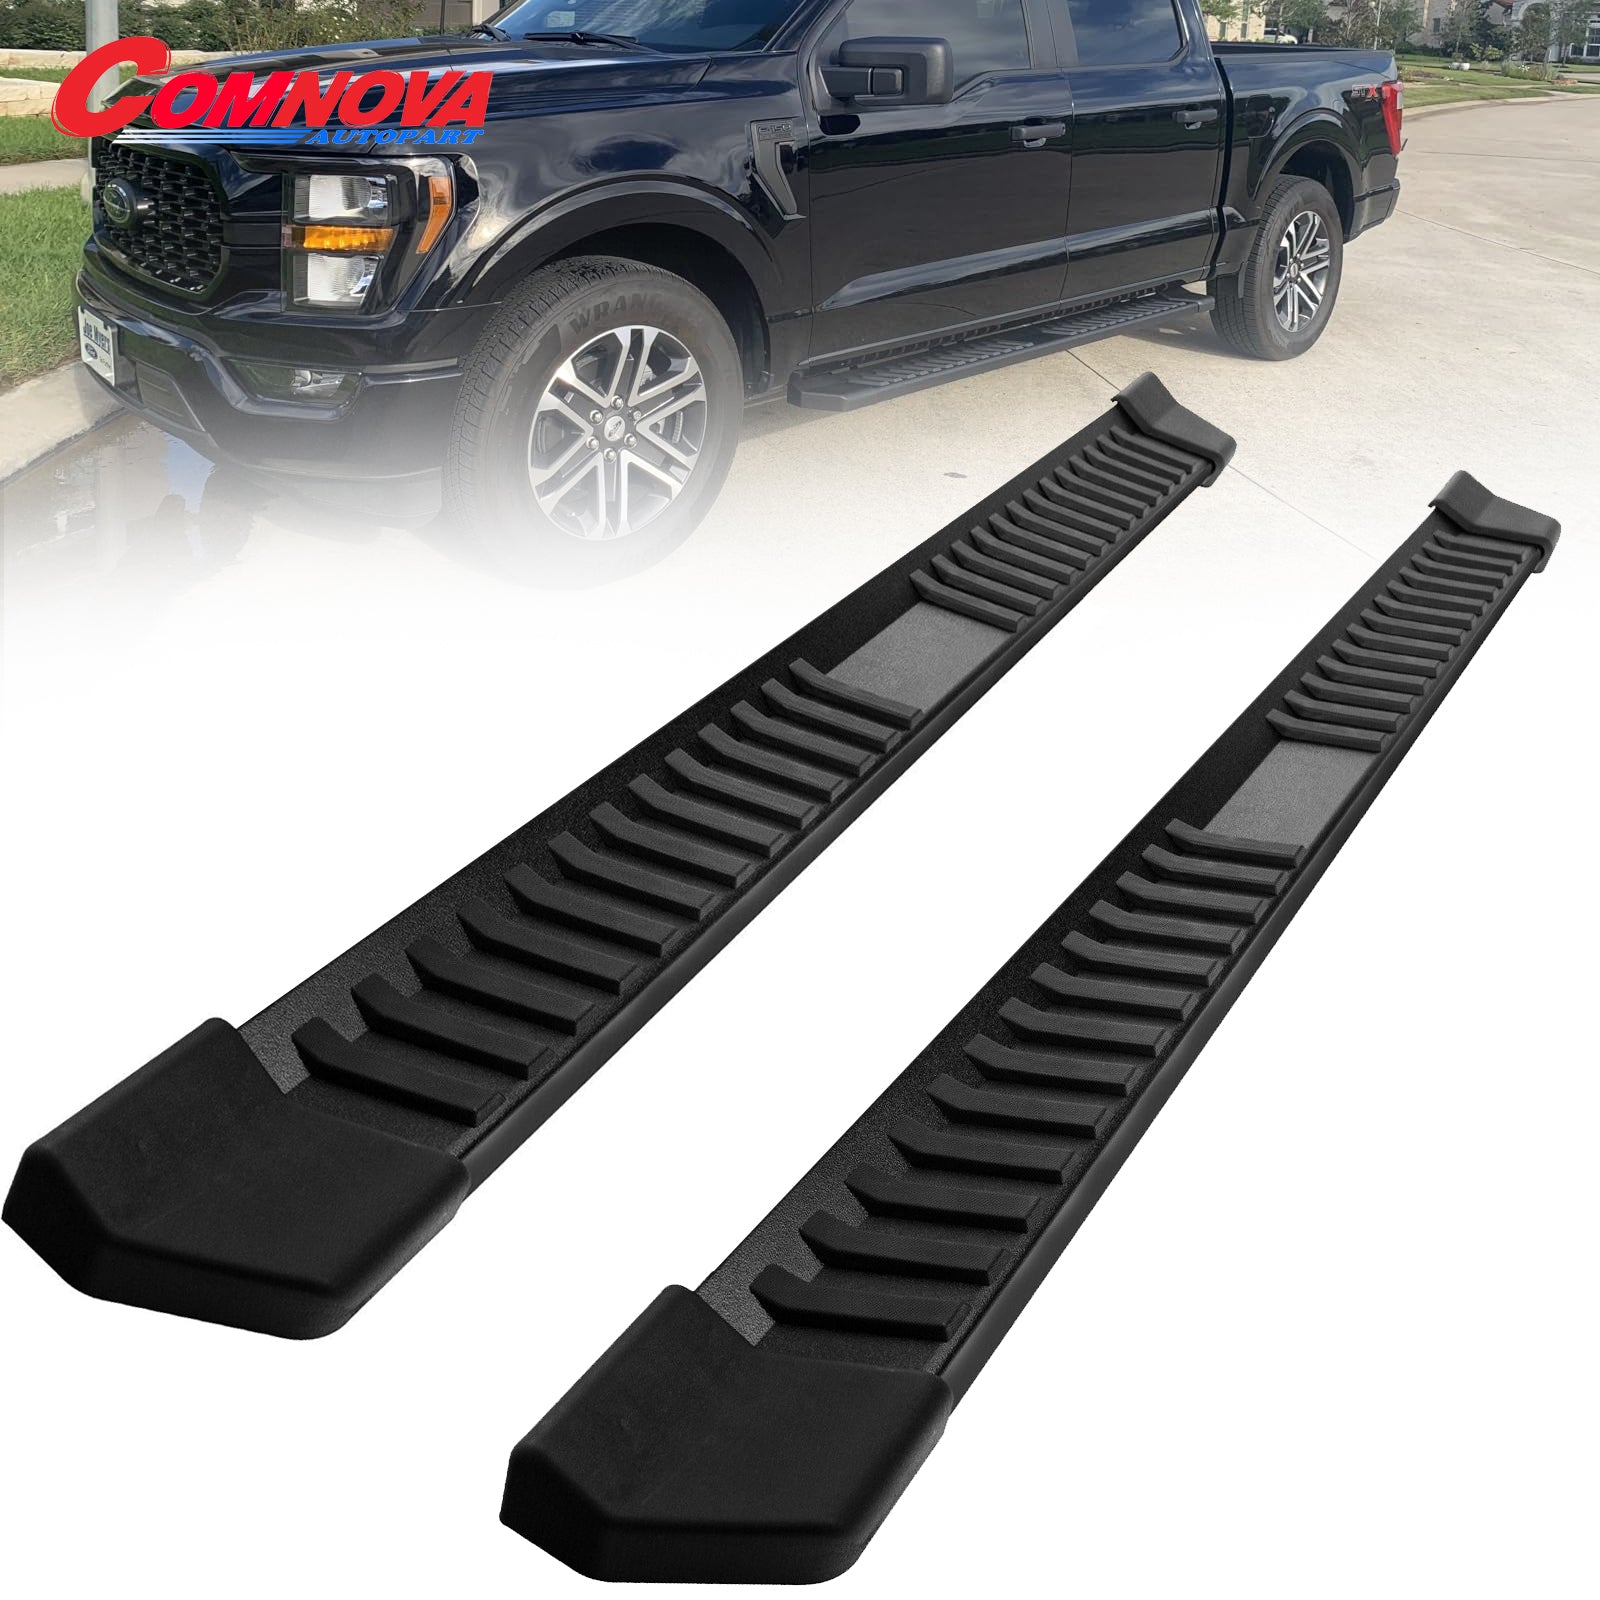 Running Boards Compatible with 2017-2024 Ford F250 Superduty Crew Cab(4 Full Size Doors) V6 Style. - COMNOVA AUTOPART